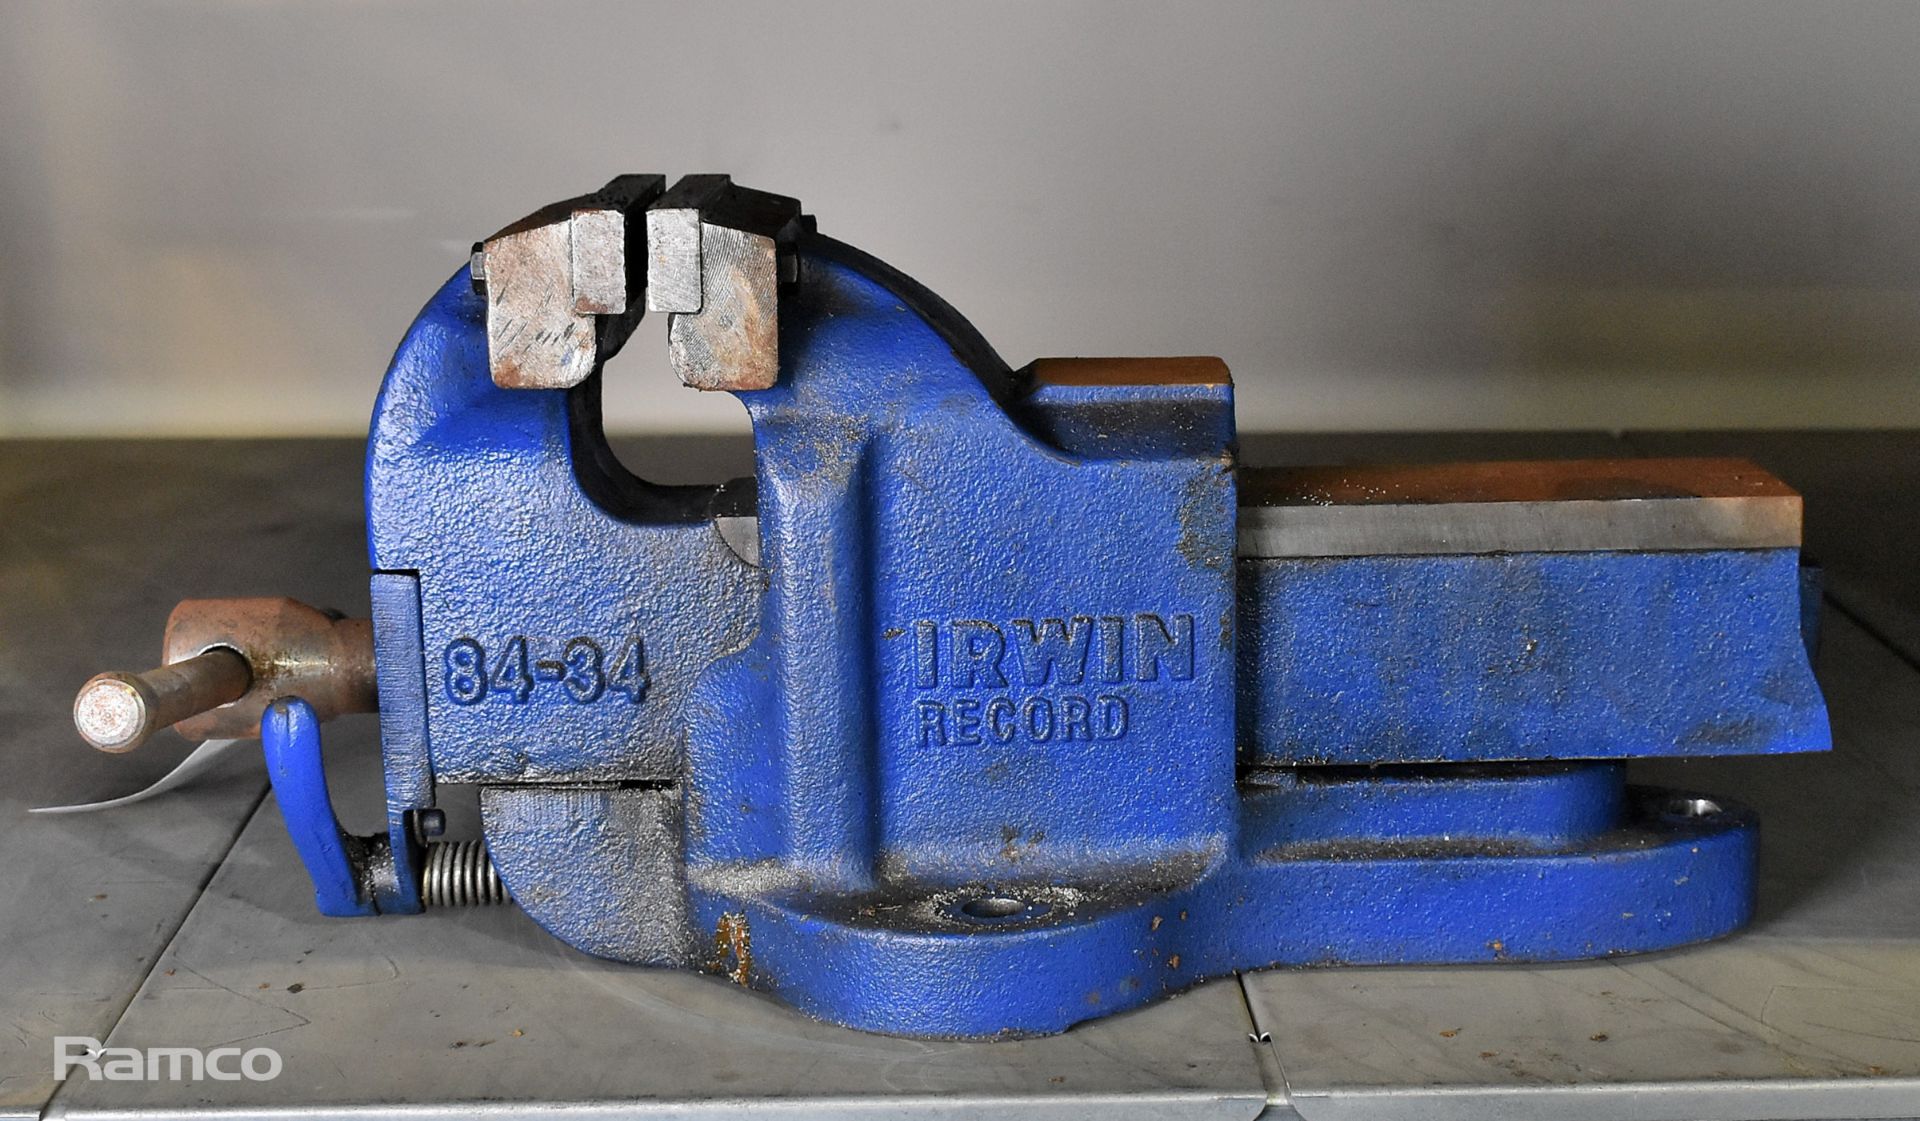 Irwin Record 84-34 bench vice - Image 3 of 3